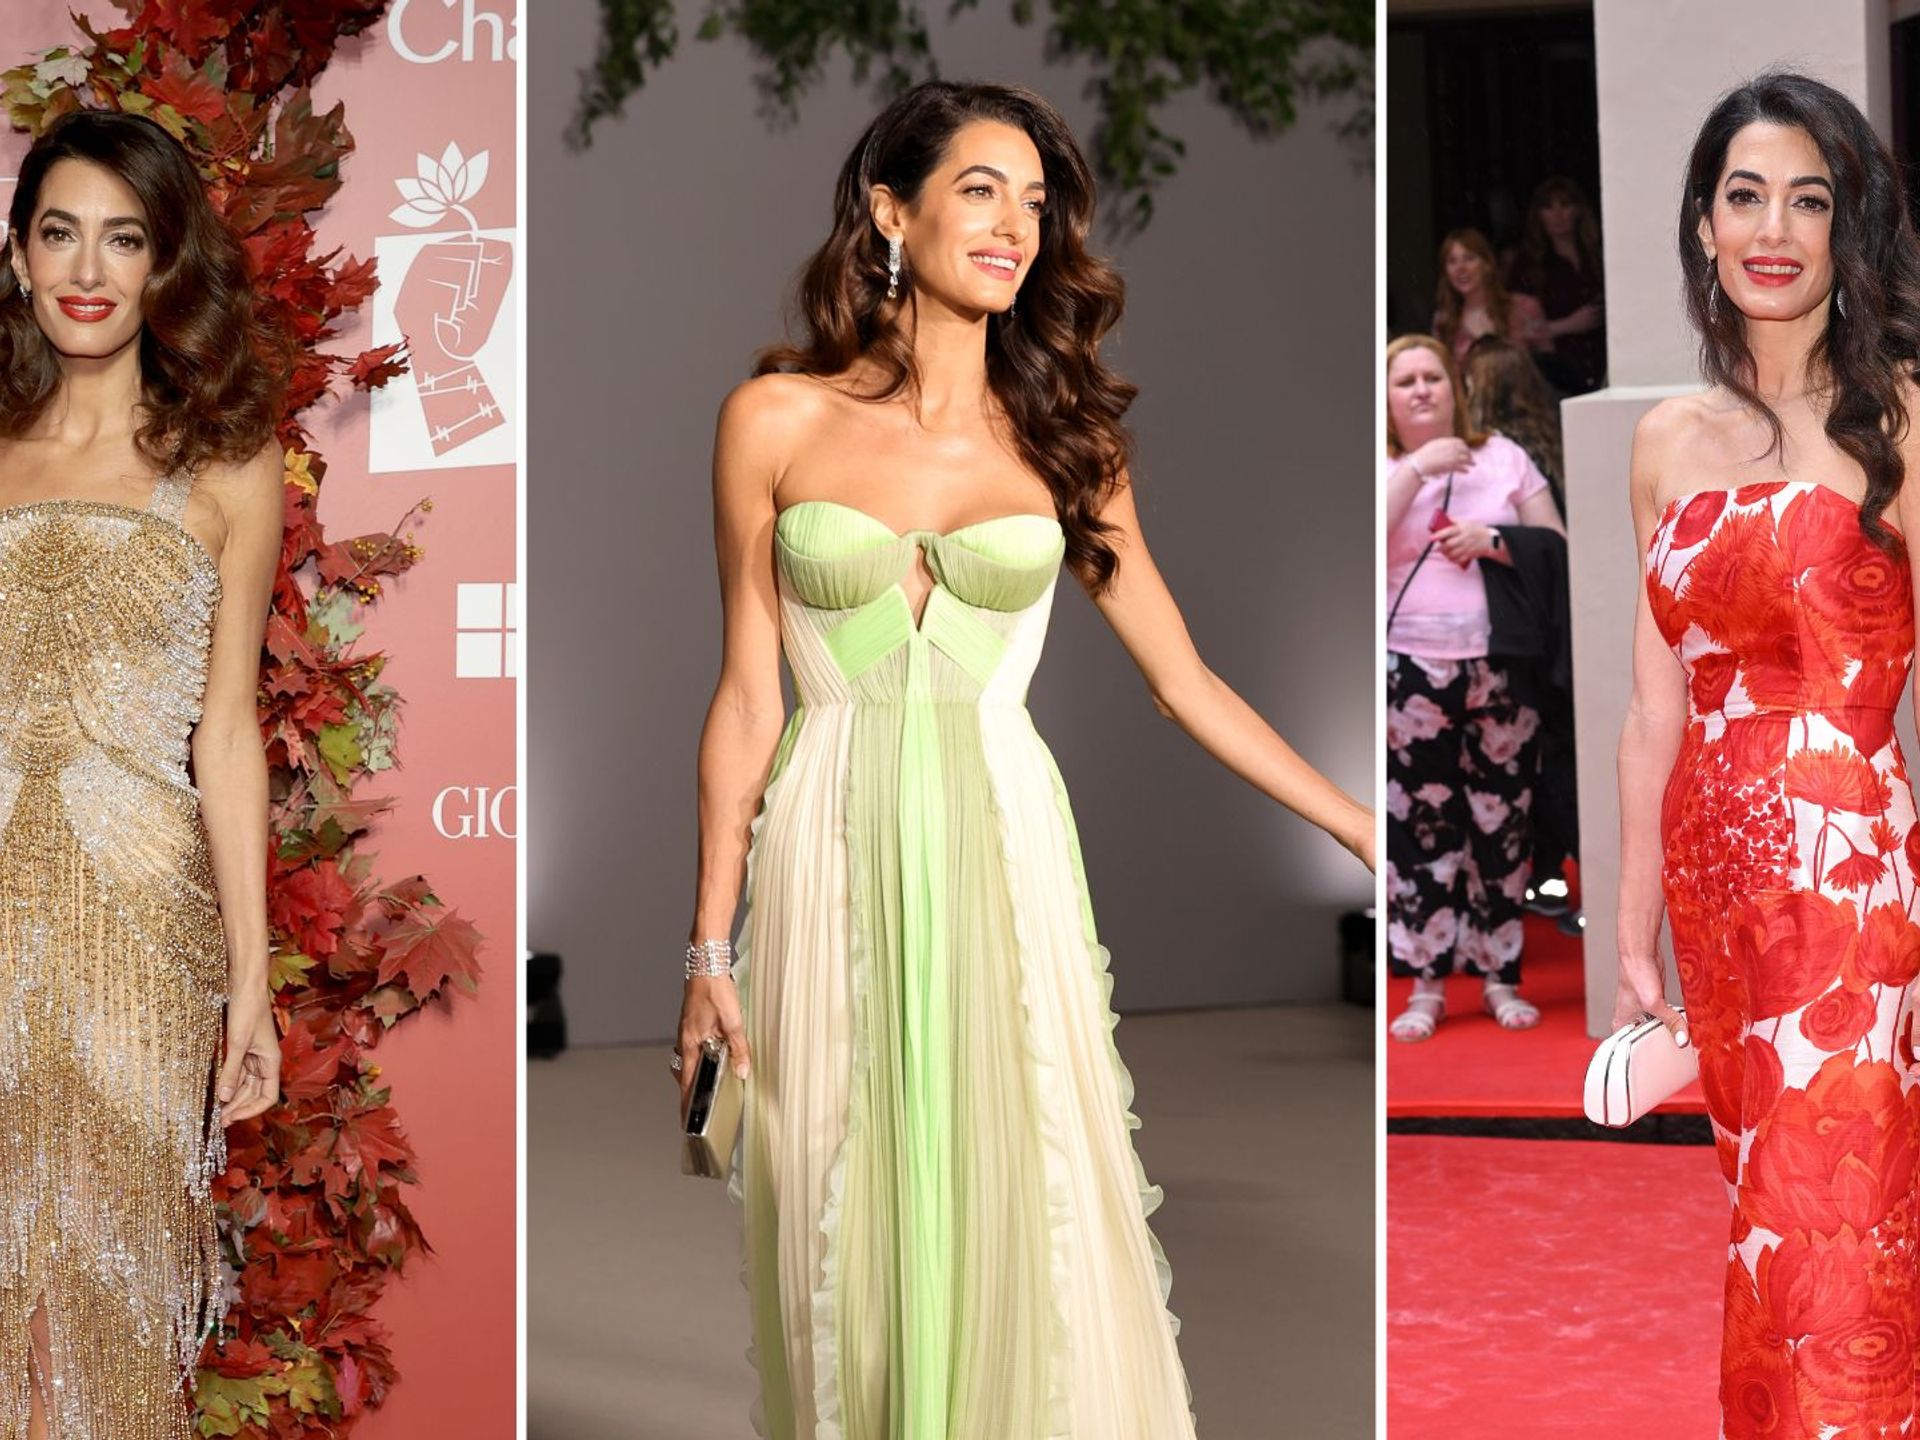 Amal Clooney's Best Looks - Pictures of Amal Clooney's Top Fashion